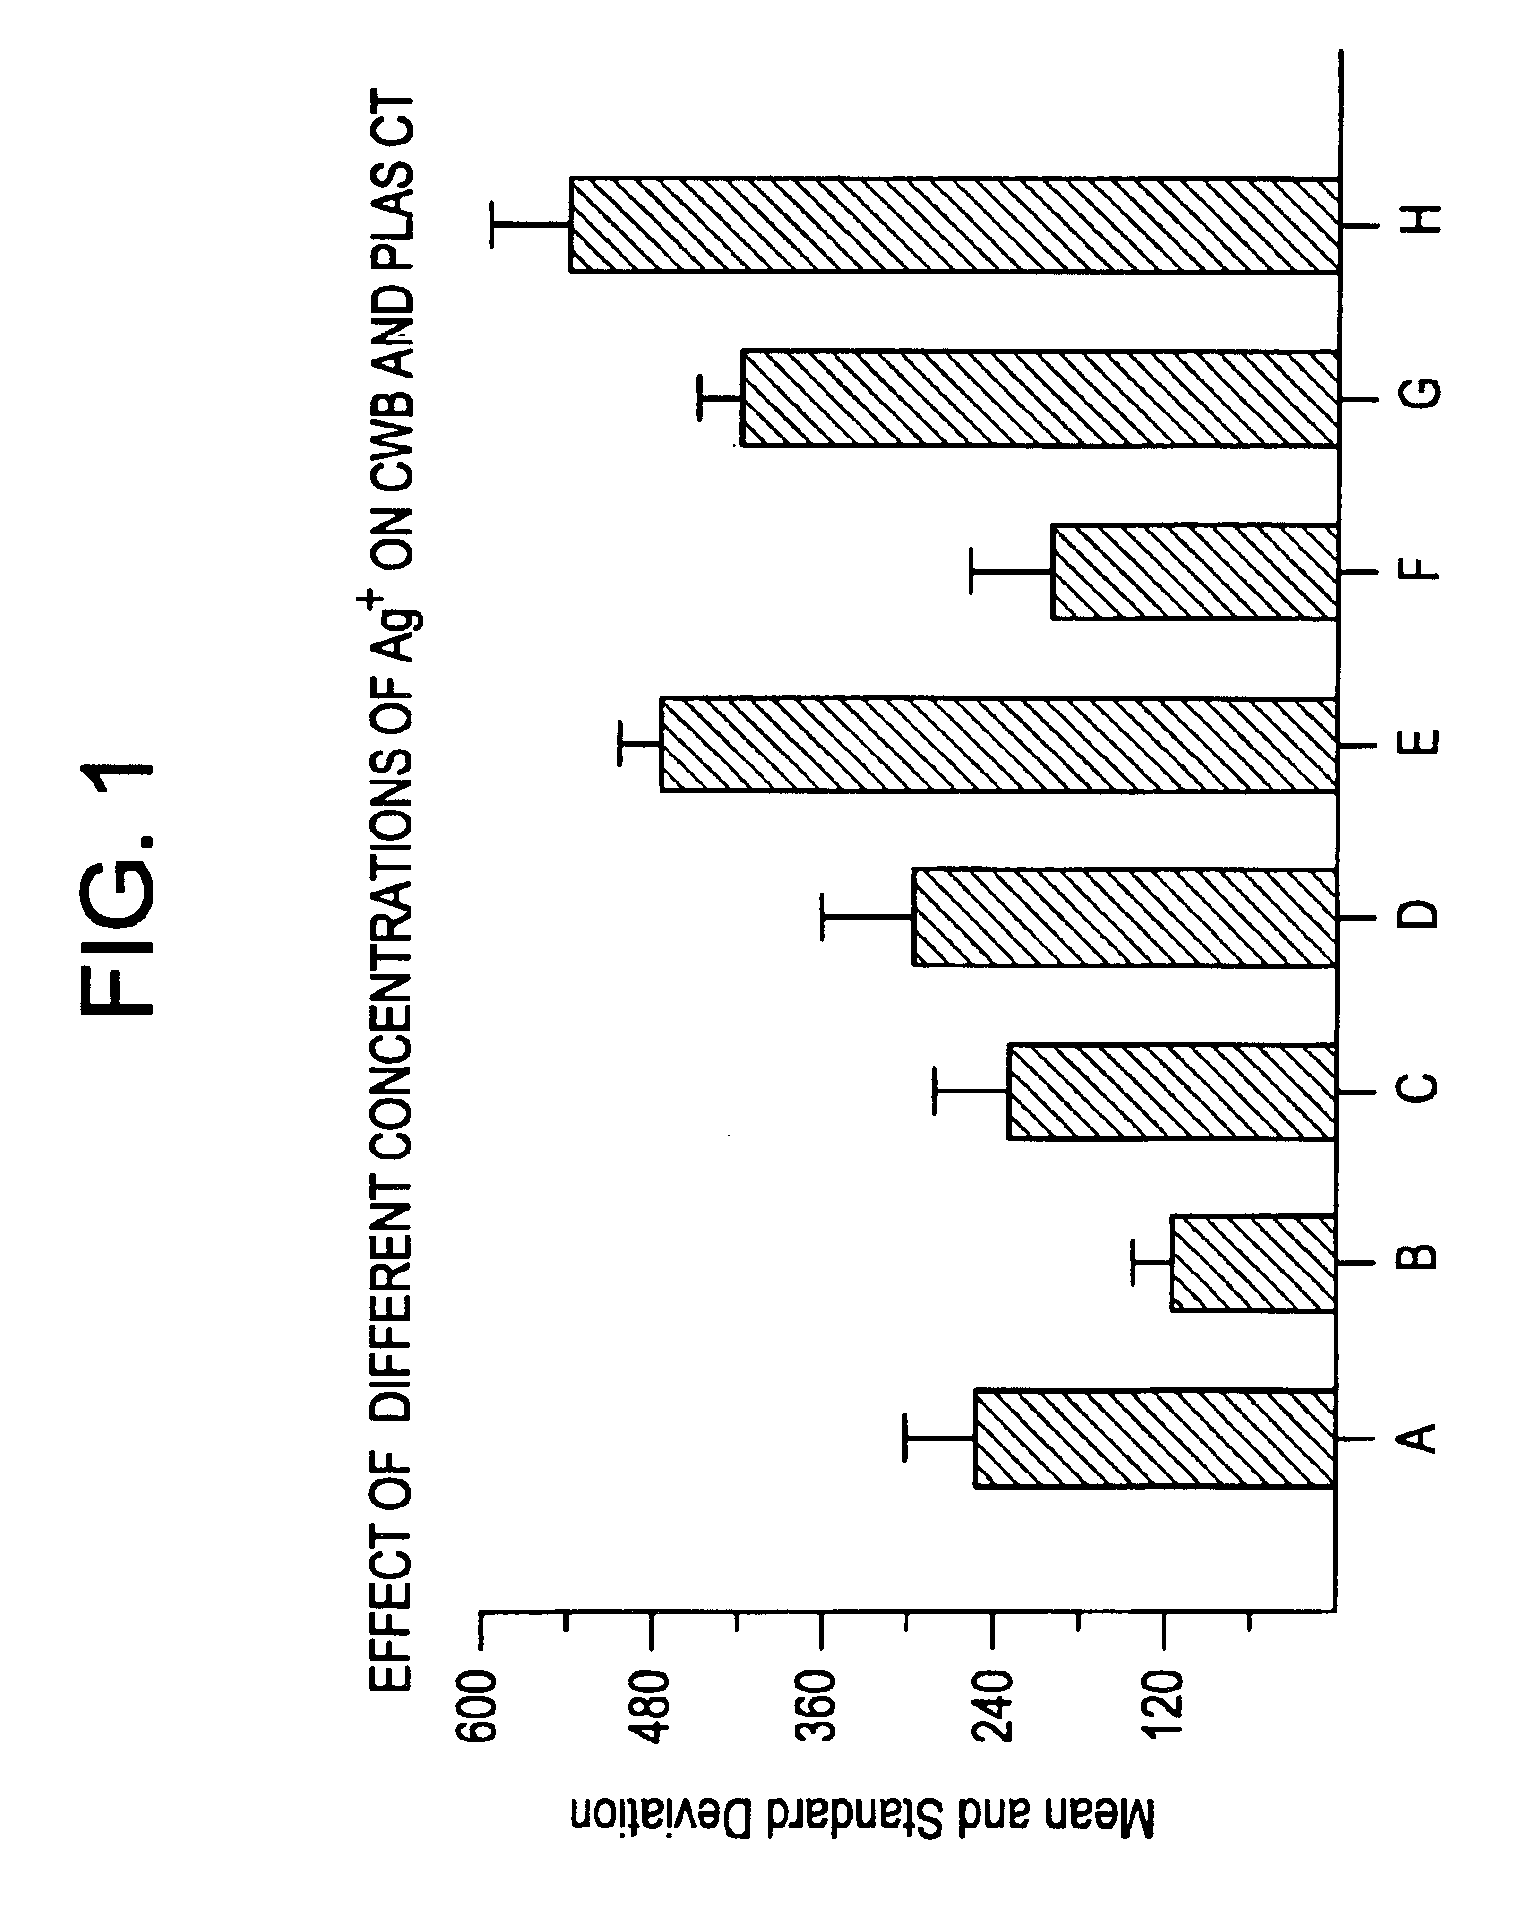 Hemostatic compositions, devices and methods